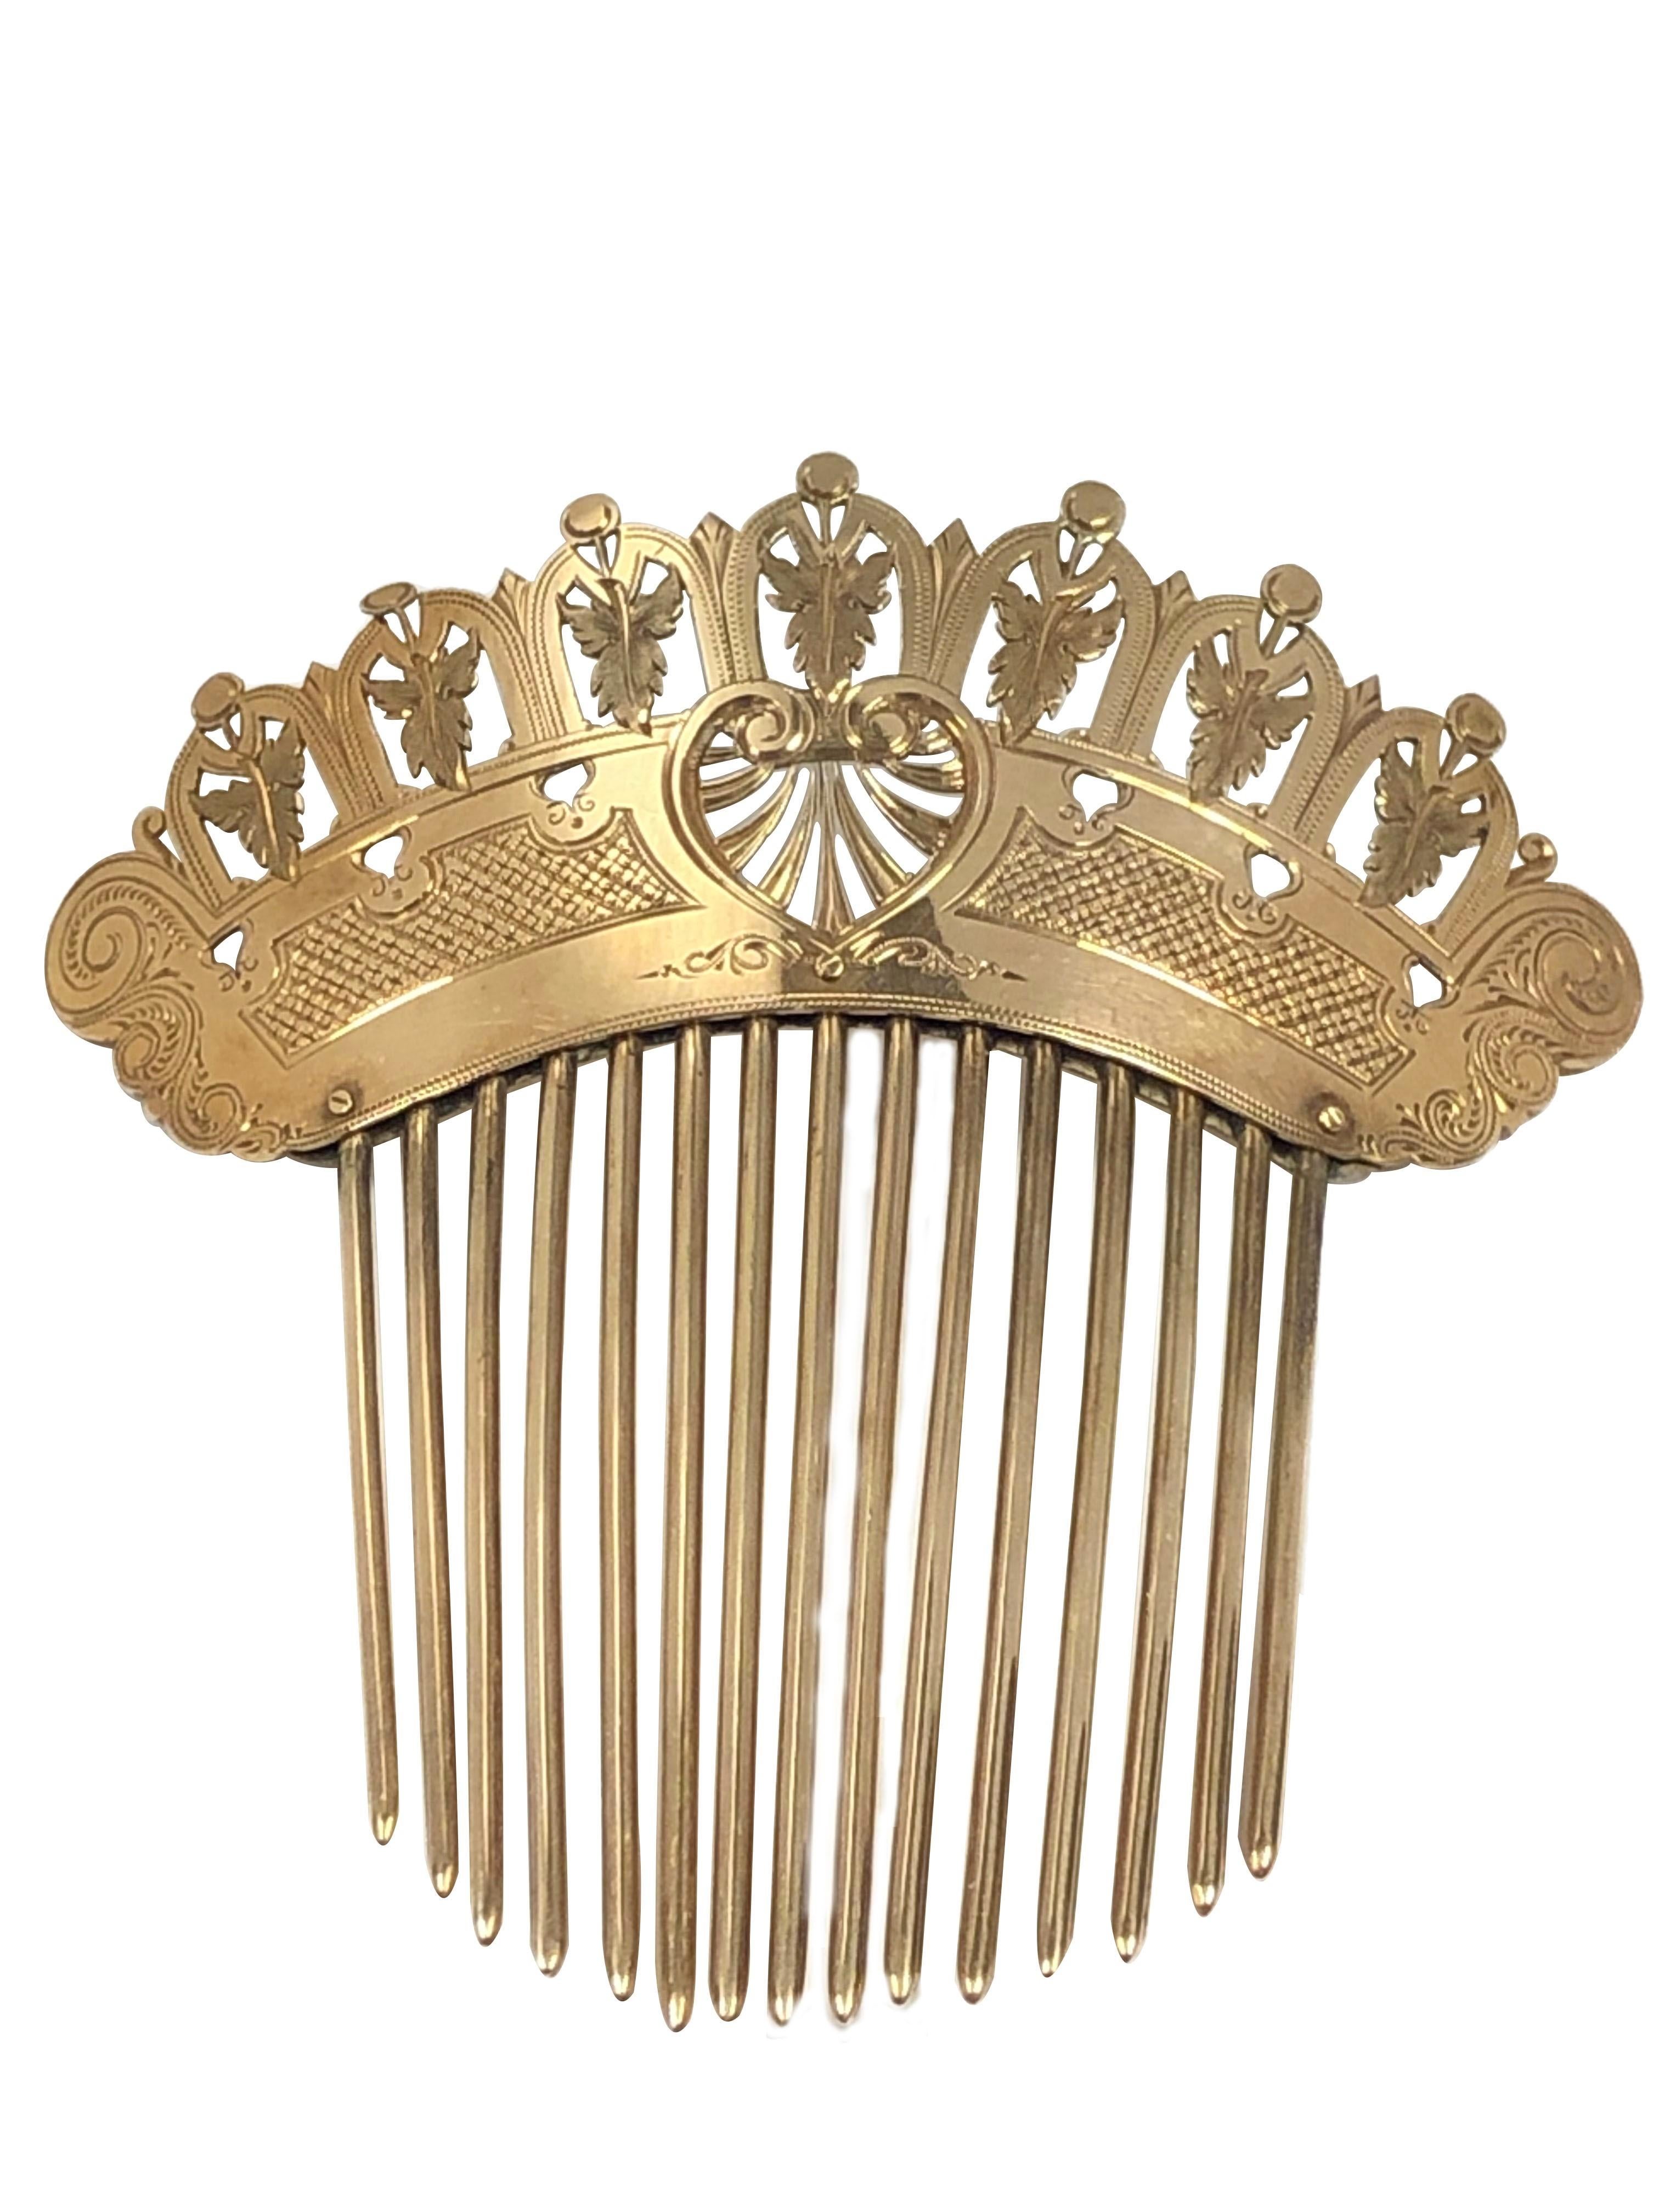 Circa 1870 - 1880 14k Rose Gold Hair Comb, measuring 4 inches in length, 4 inches wide and weighing 41.5 Grams, finely detailed with hand engraving workmanship on both sides.